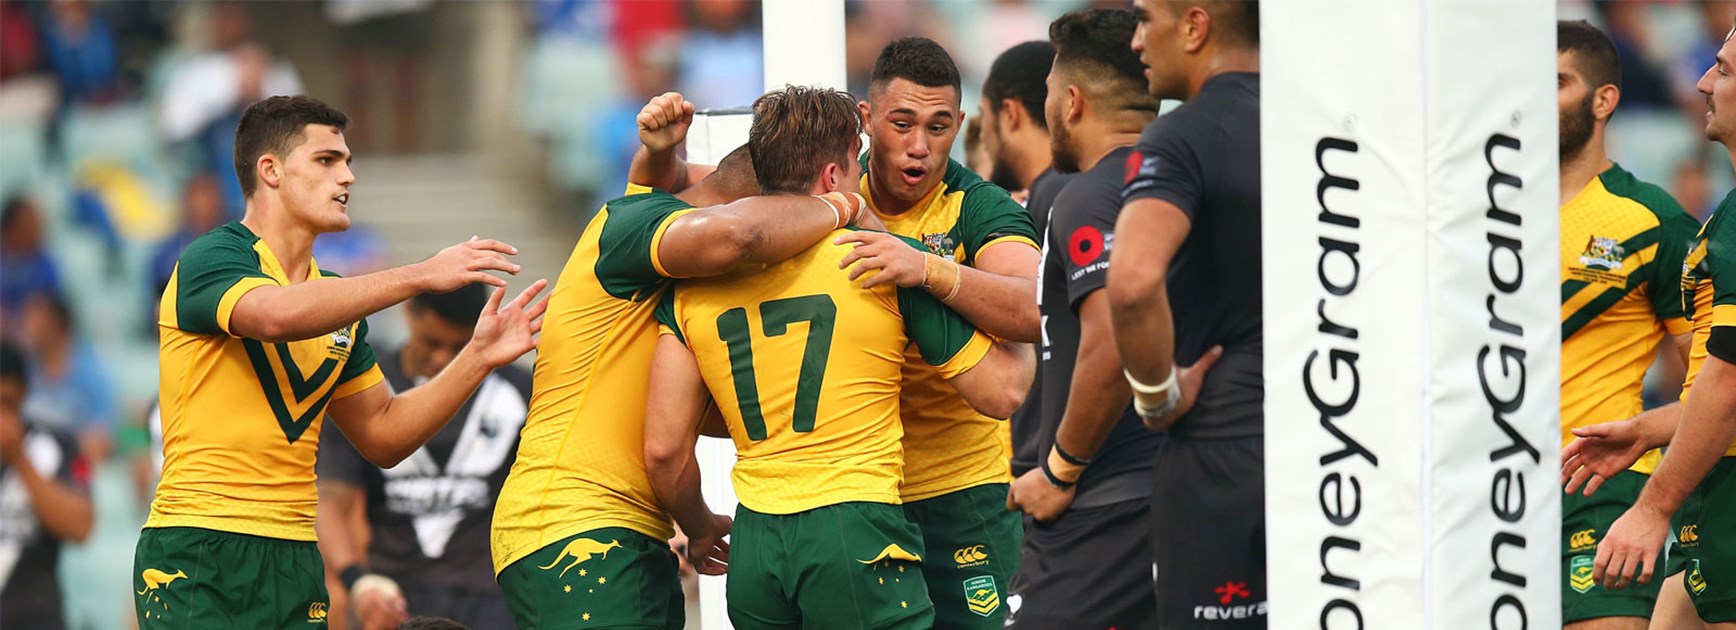 The Junior Kangaroos celebrated a 34-20 win over the Junior Kiwis on Saturday.